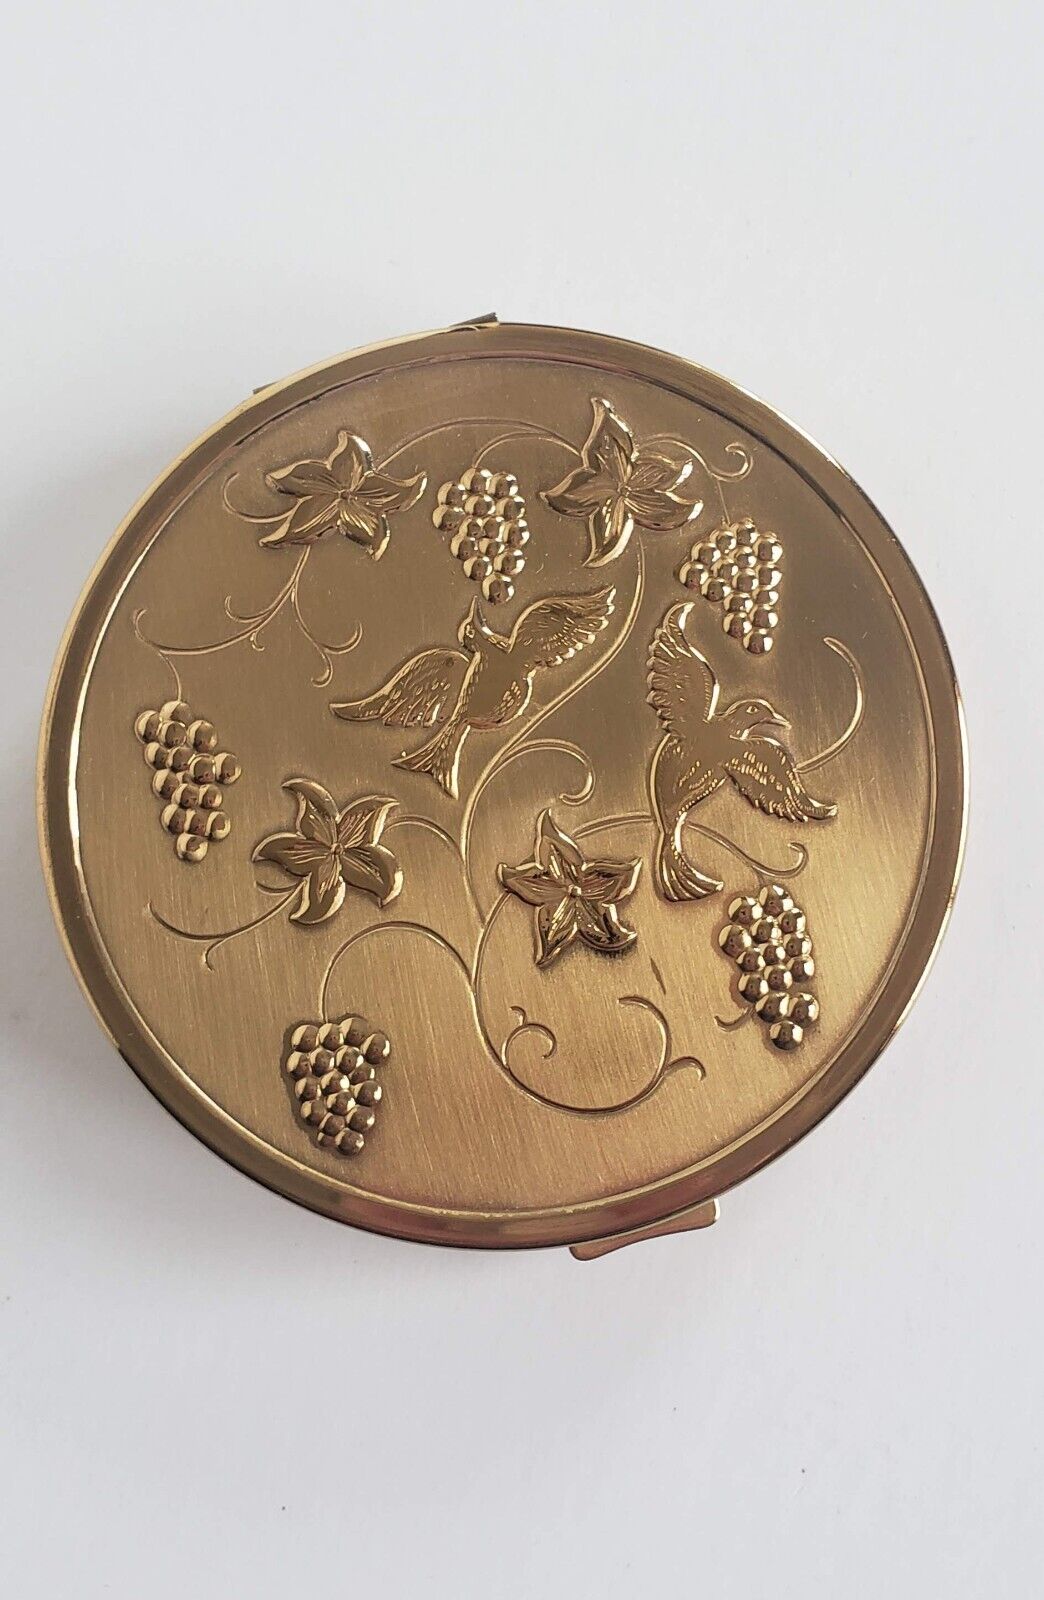 Vintage Gold Tone Mirrored Compact by Richard Hudnut Grapevines, Birds & Flowers